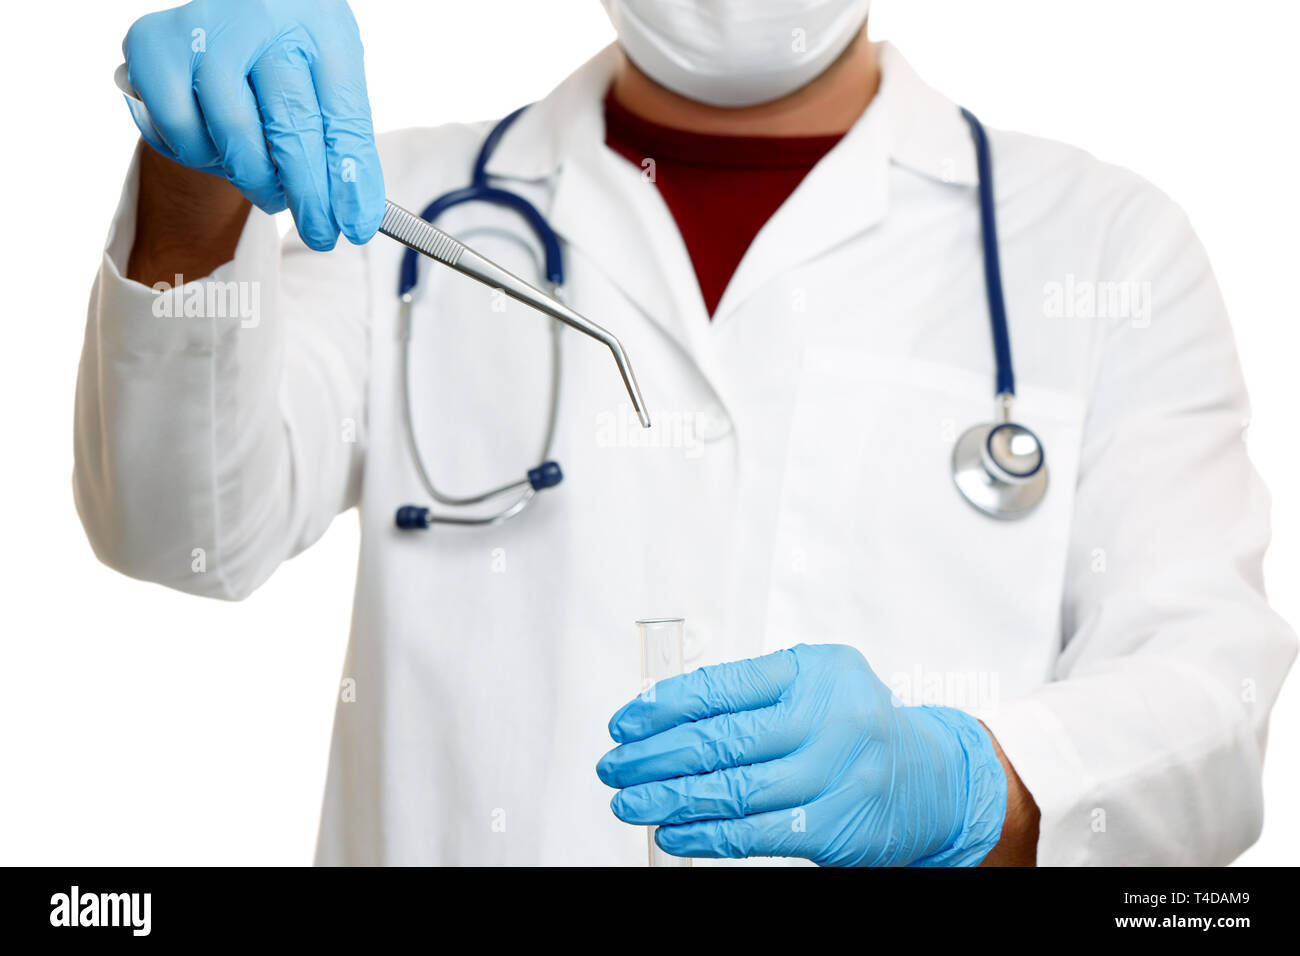 Image of doctor with phonendoscope in blue rubber gloves holding tweezers Stock Photo